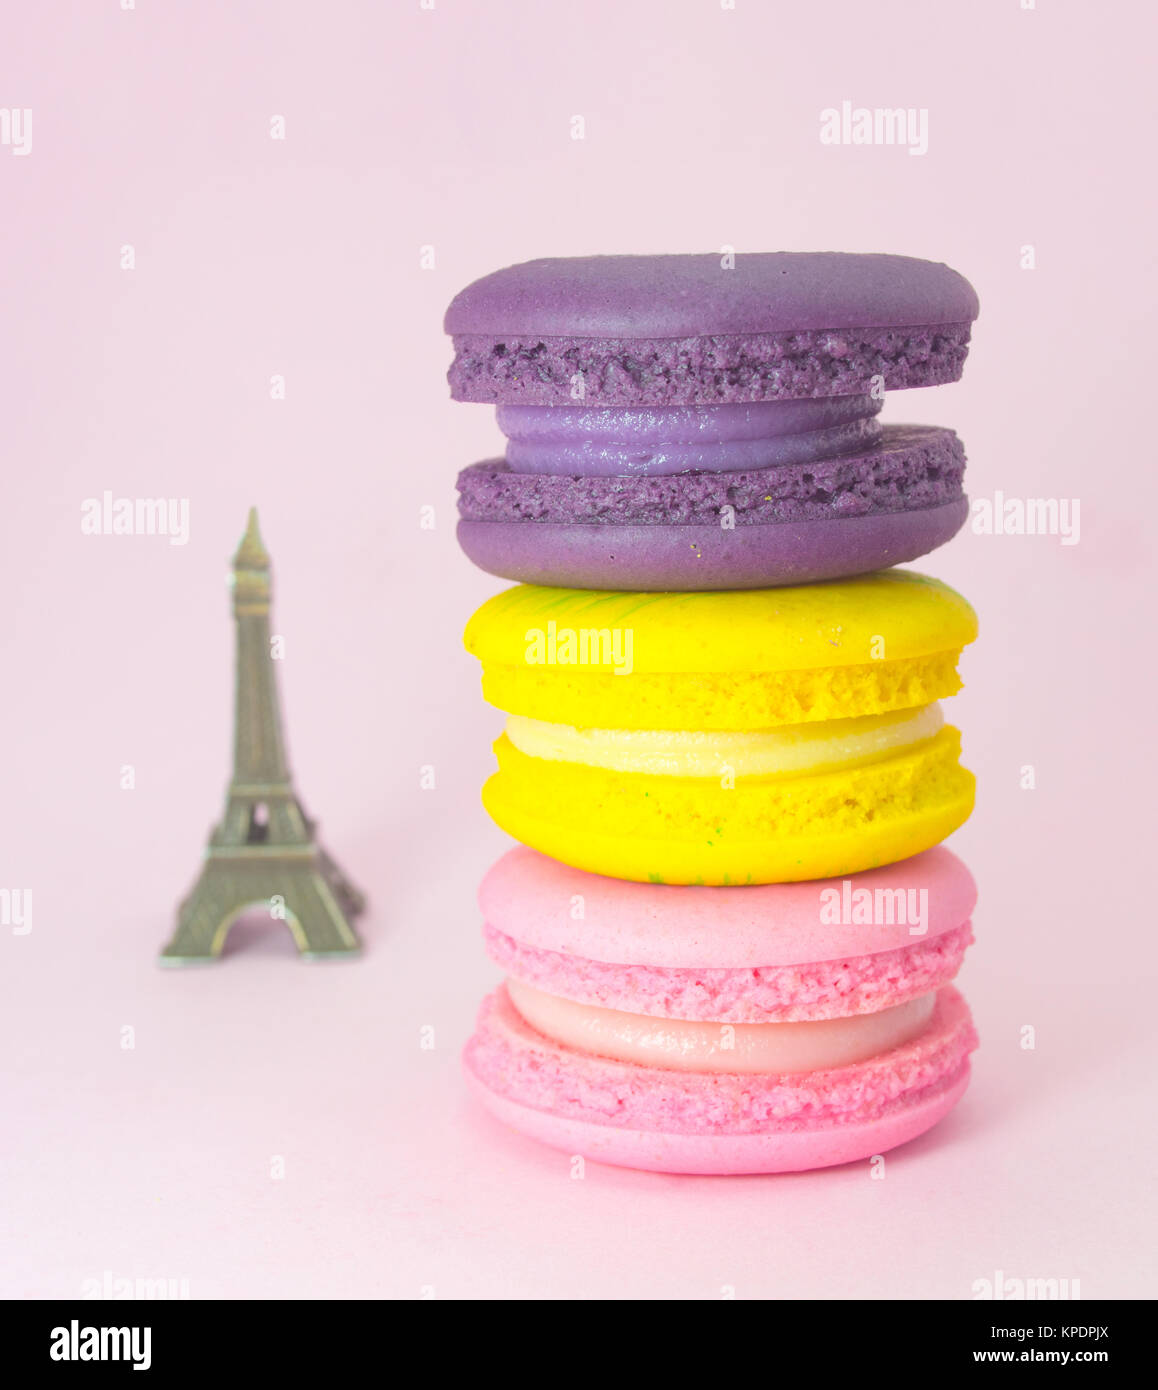 macarons and Eiffel Tower Stock Photo